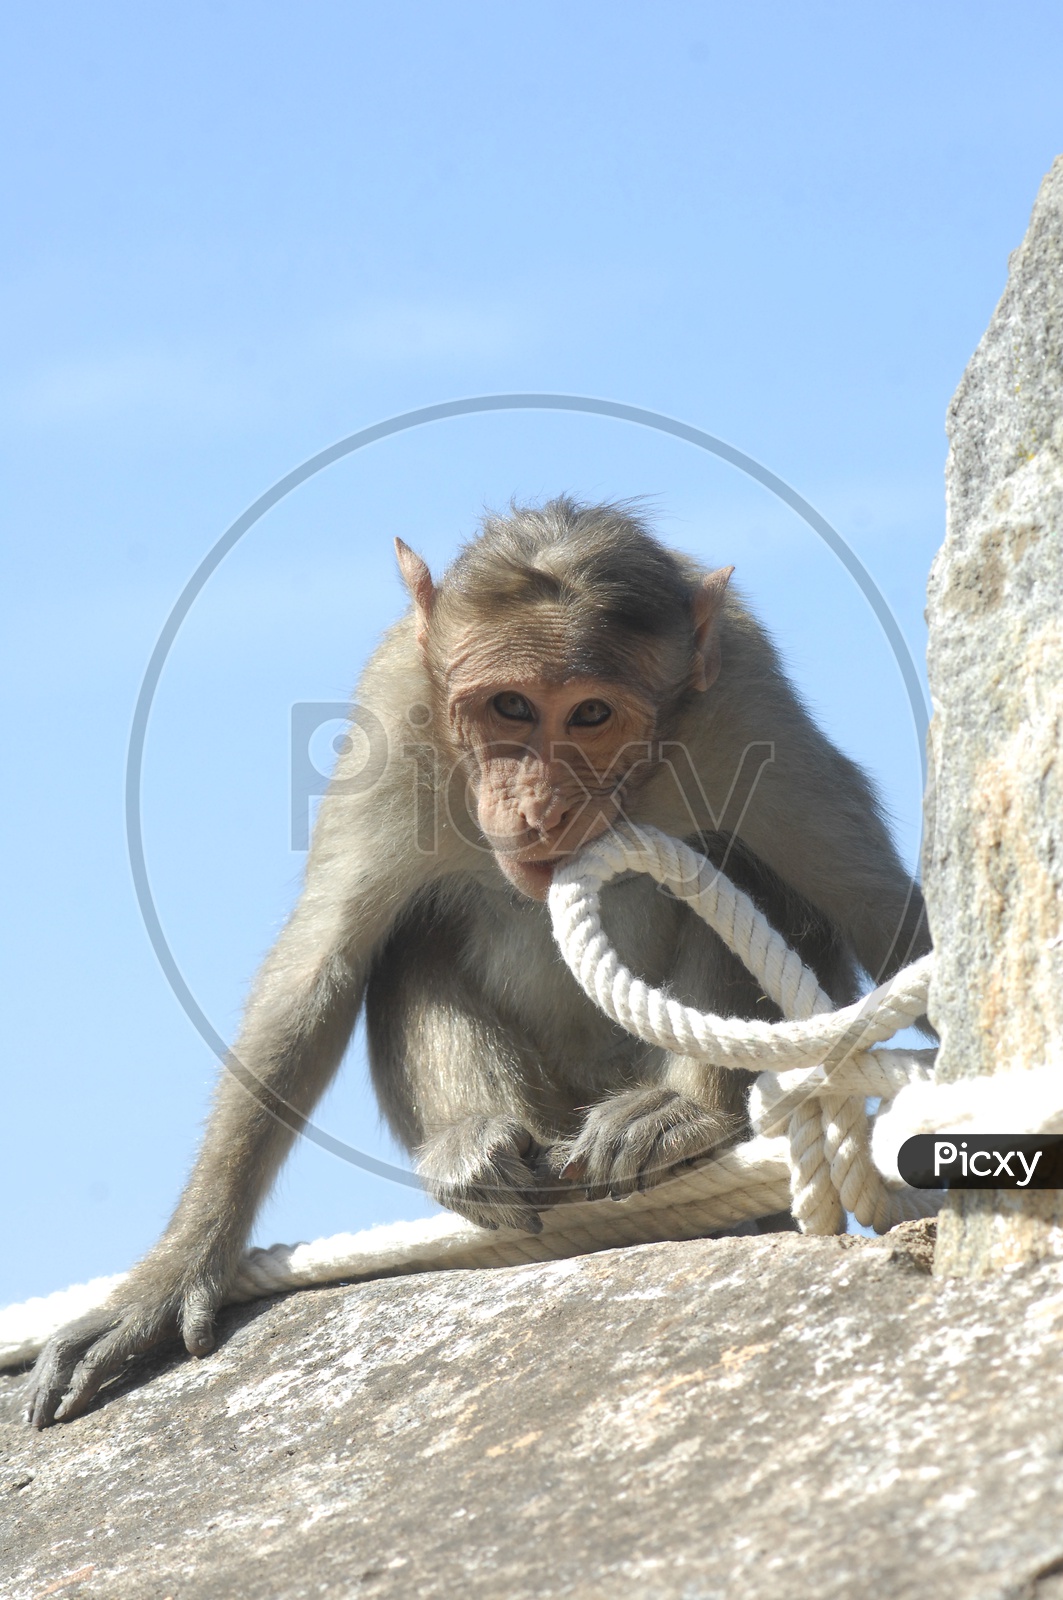 Macaque Or Monkey Sitting on a wall